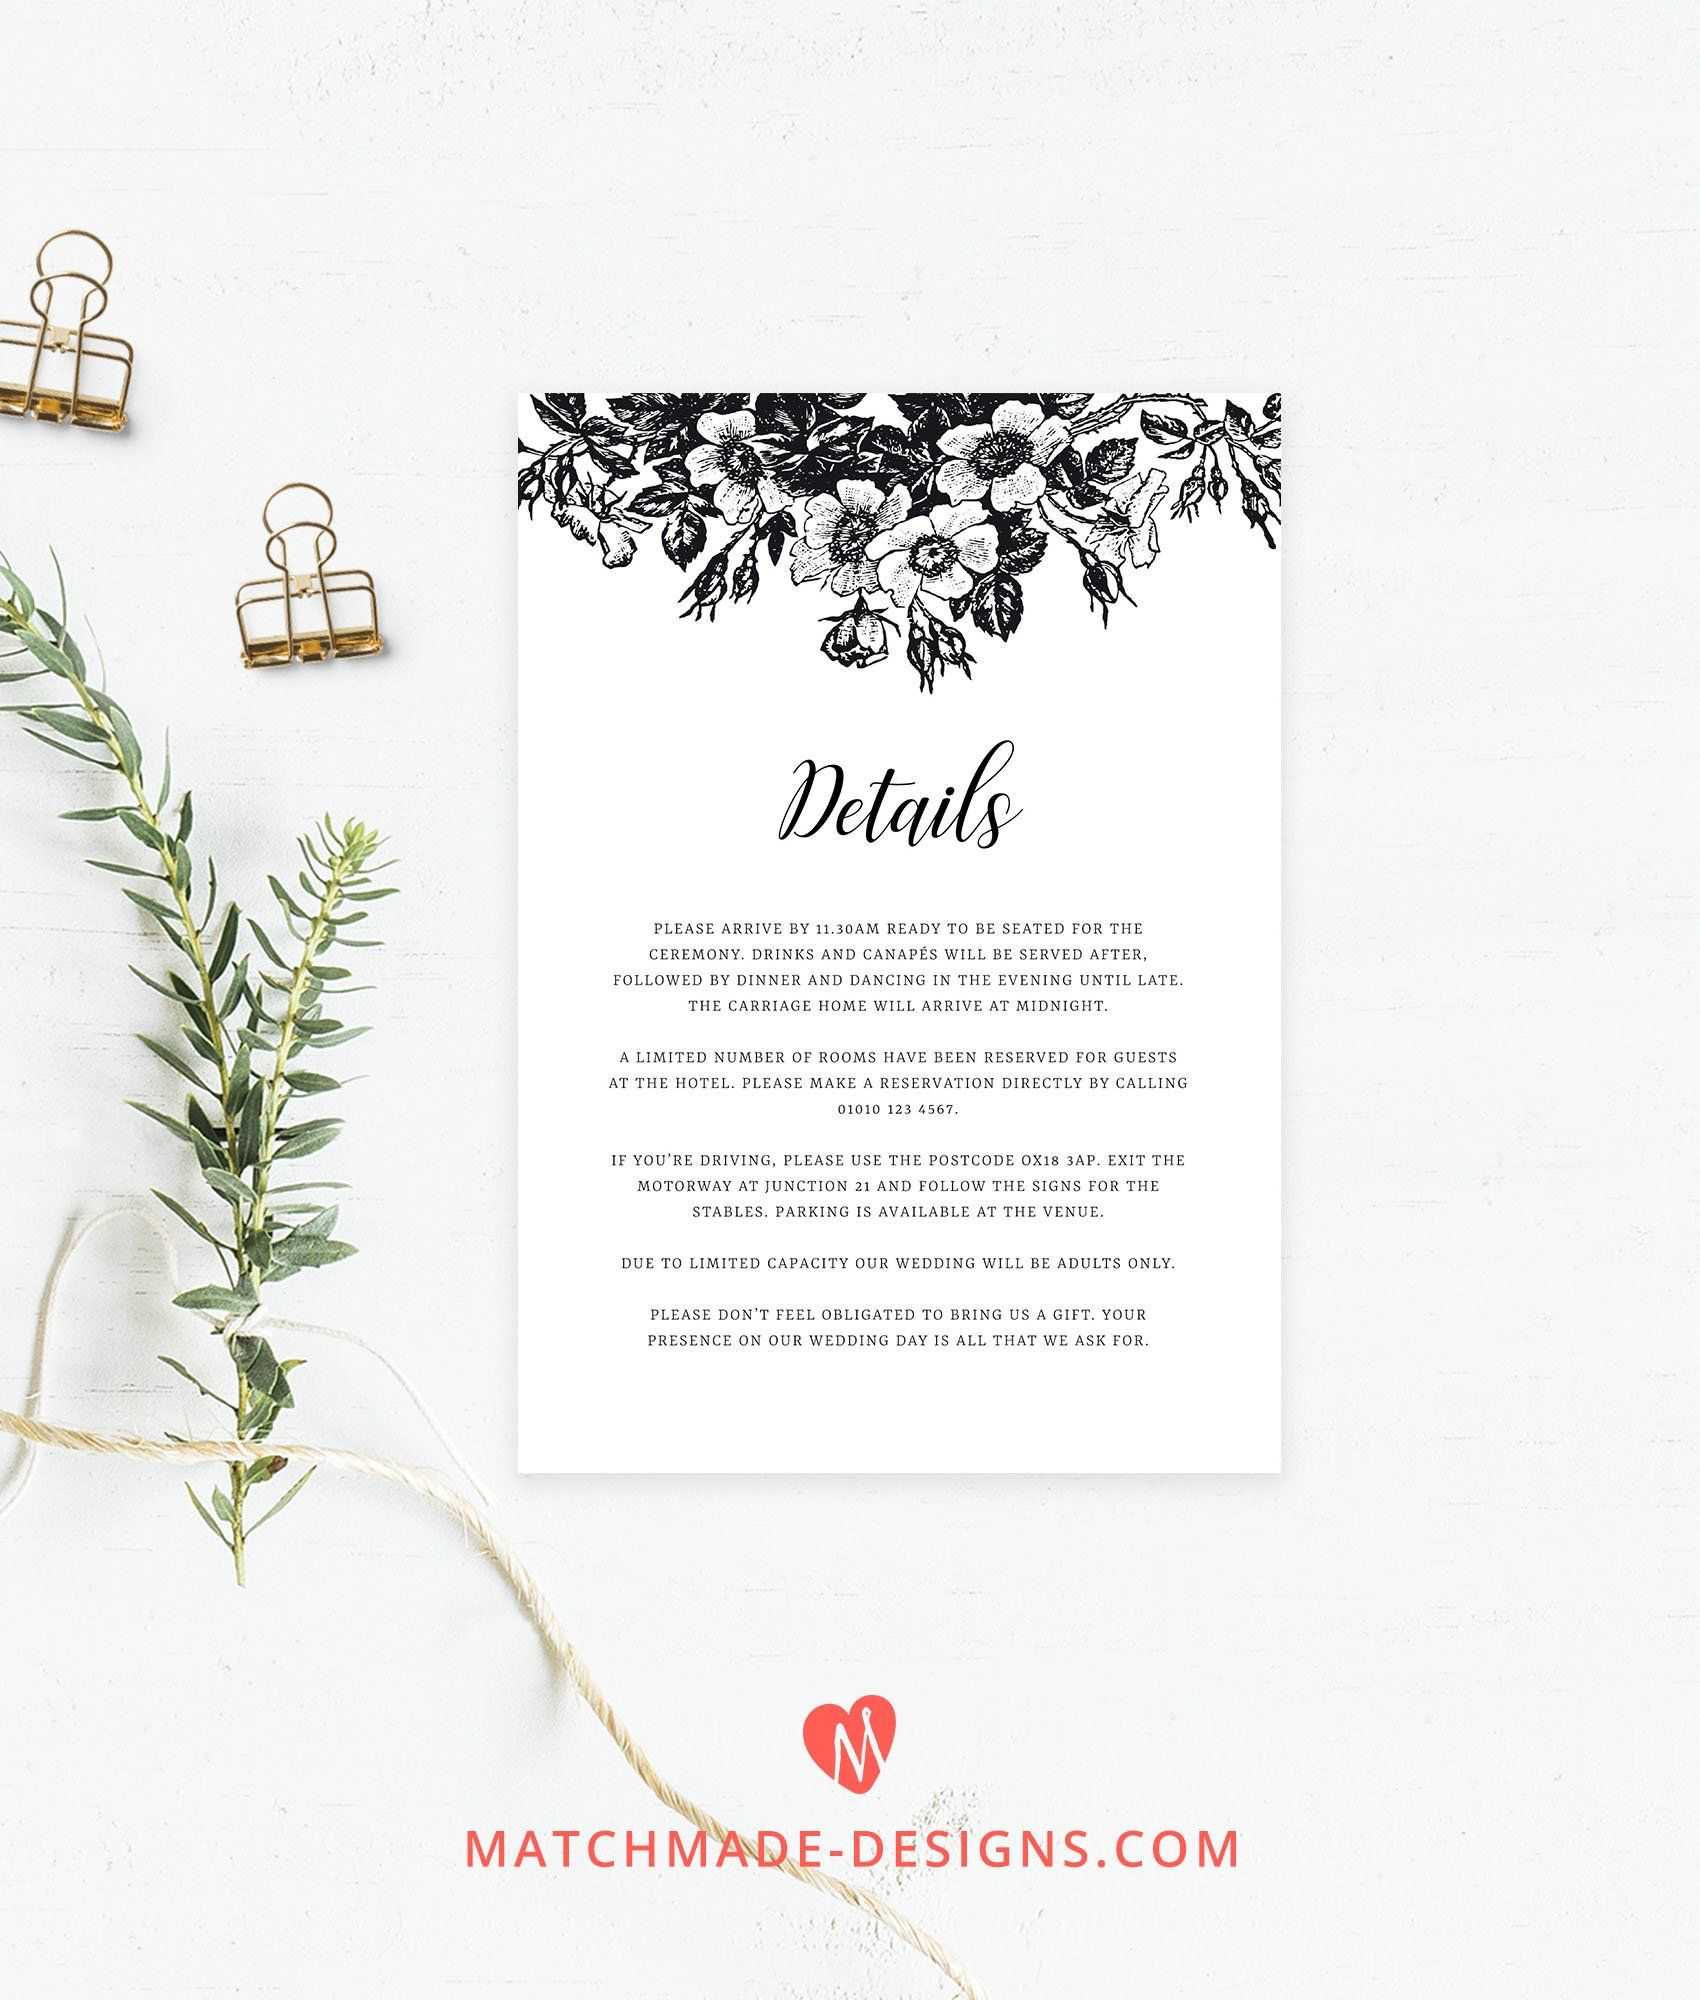 Black & White Wedding Details Card Template | Floral Wedding For Wedding Hotel Information Card Template